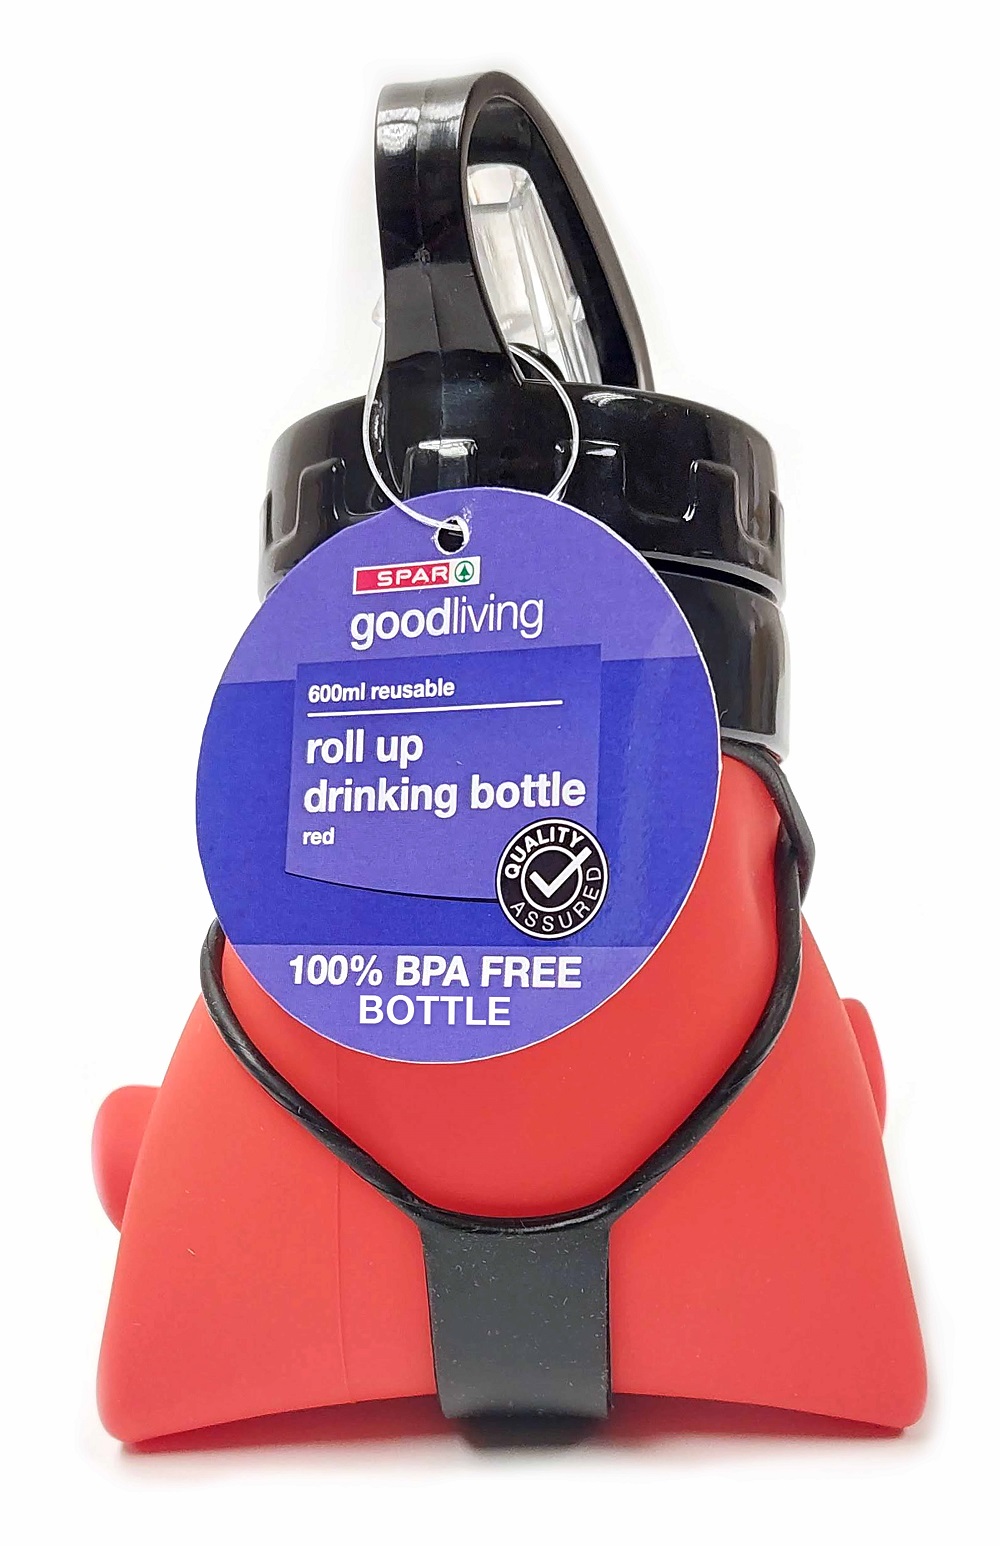 roll up drinking bottle red 